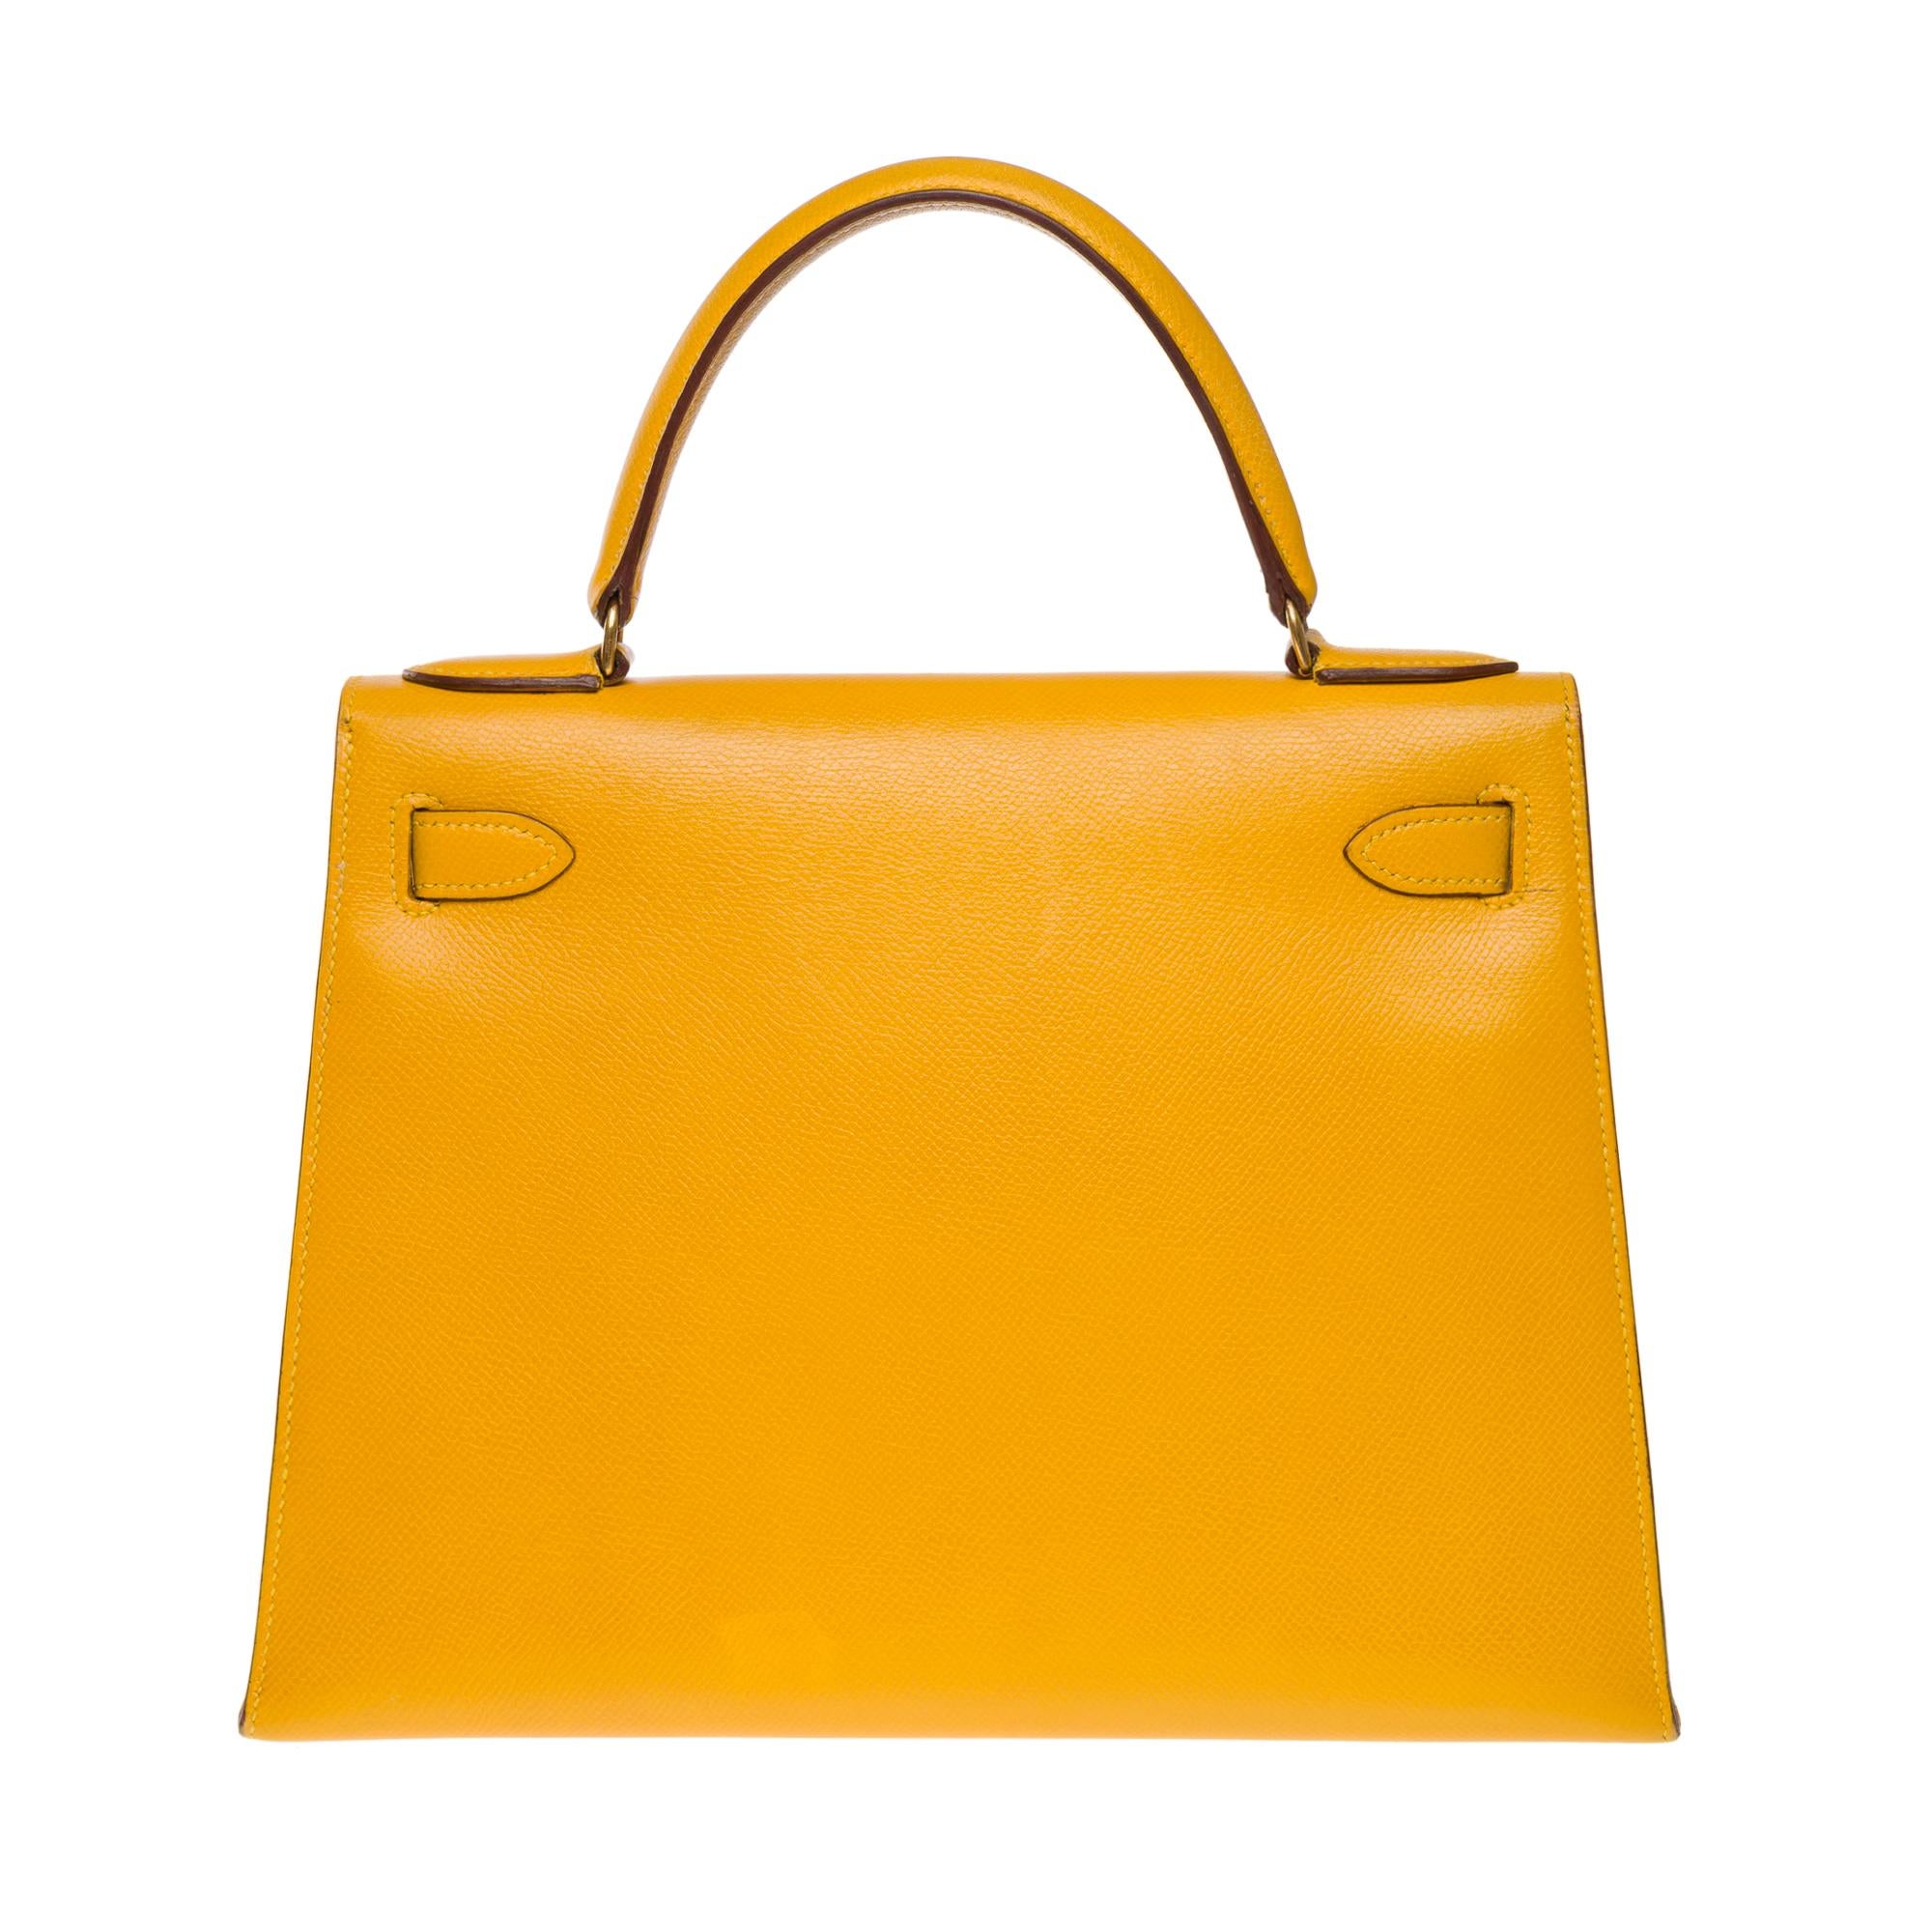 Exquisite Hermes Kelly 28 sellier handbag strap in Courchevel Yellow Courchevel leather , gold plated metal hardware, yellow leather handle, removable shoulder strap in yellow leather for a hand, shoulder or shoulder strap

Flap closure
Yellow